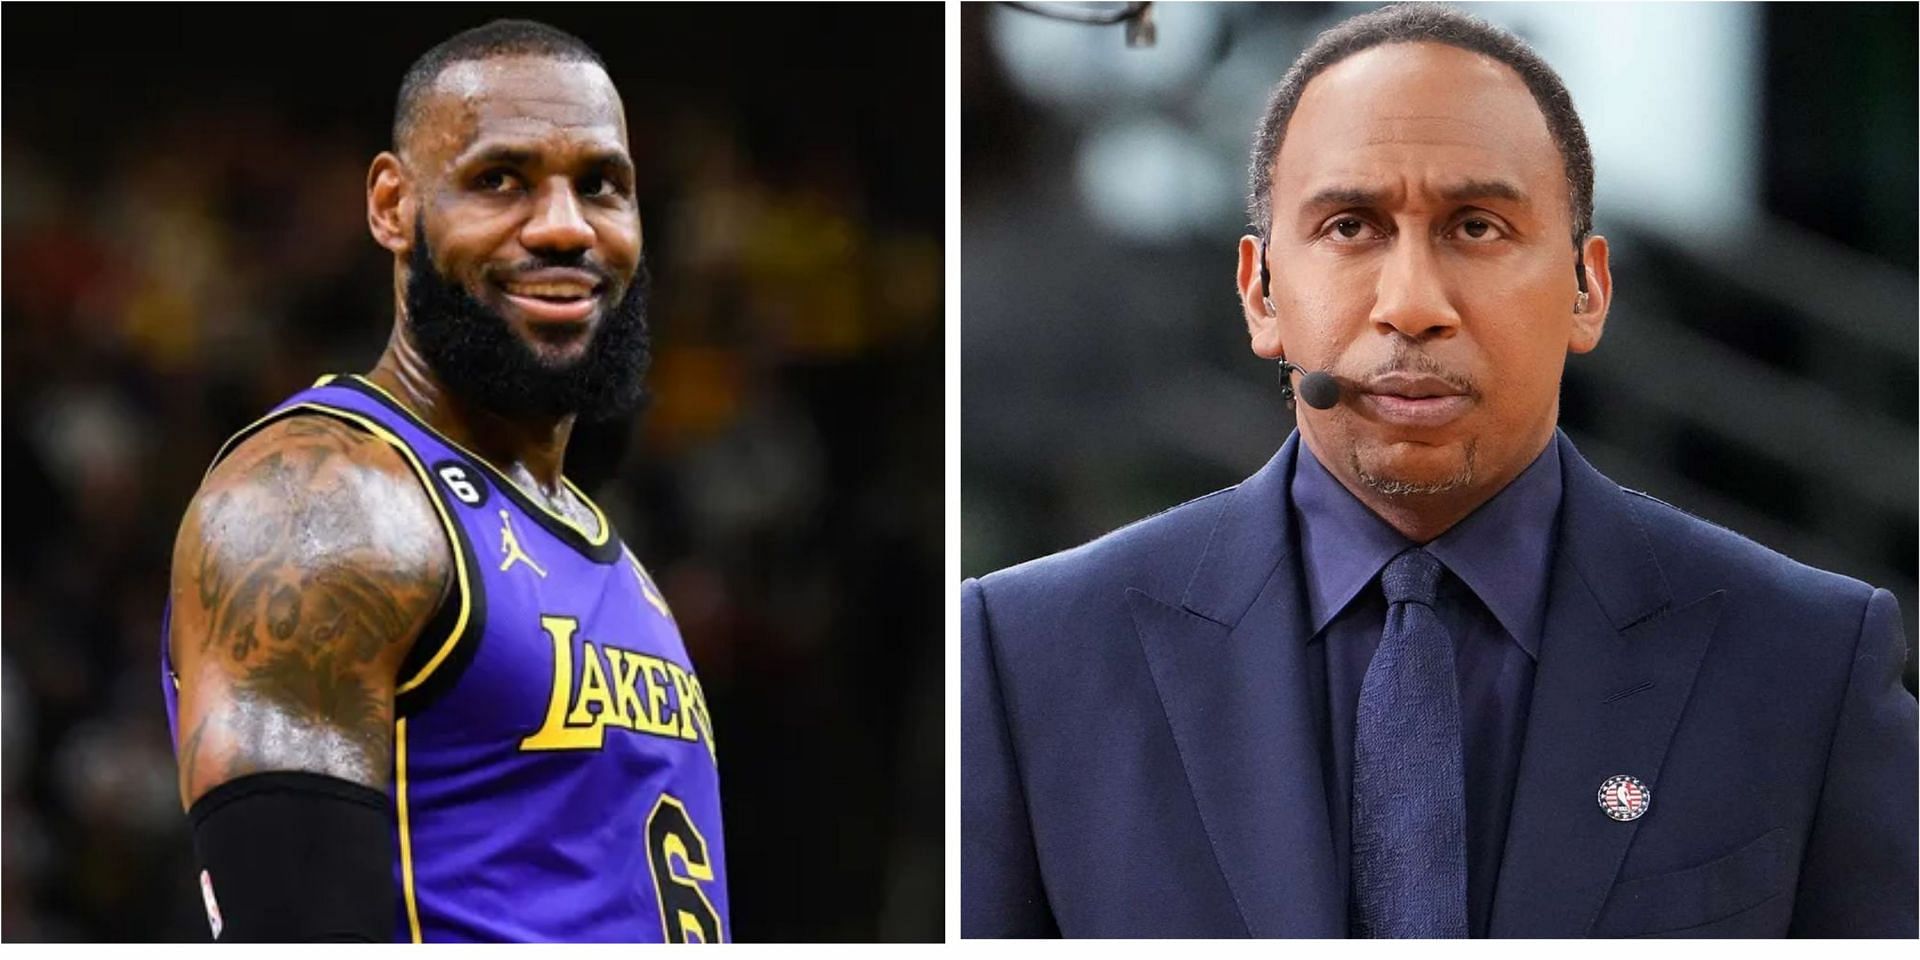 LeBron James comically alludes to iconic Stephen A. Smith reference